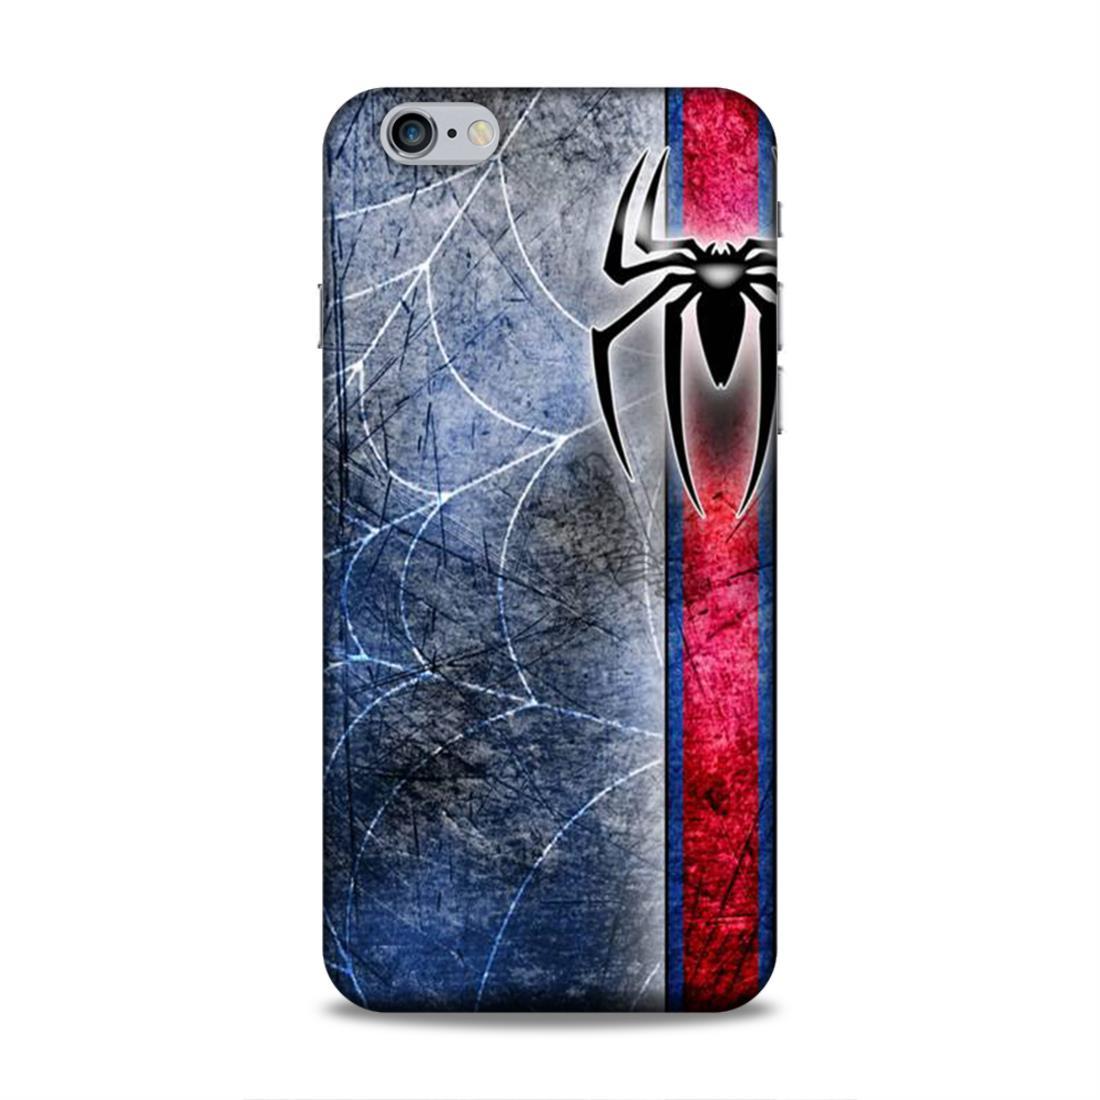 Spider Pattern iPhone 6 Plus Phone Back Cover